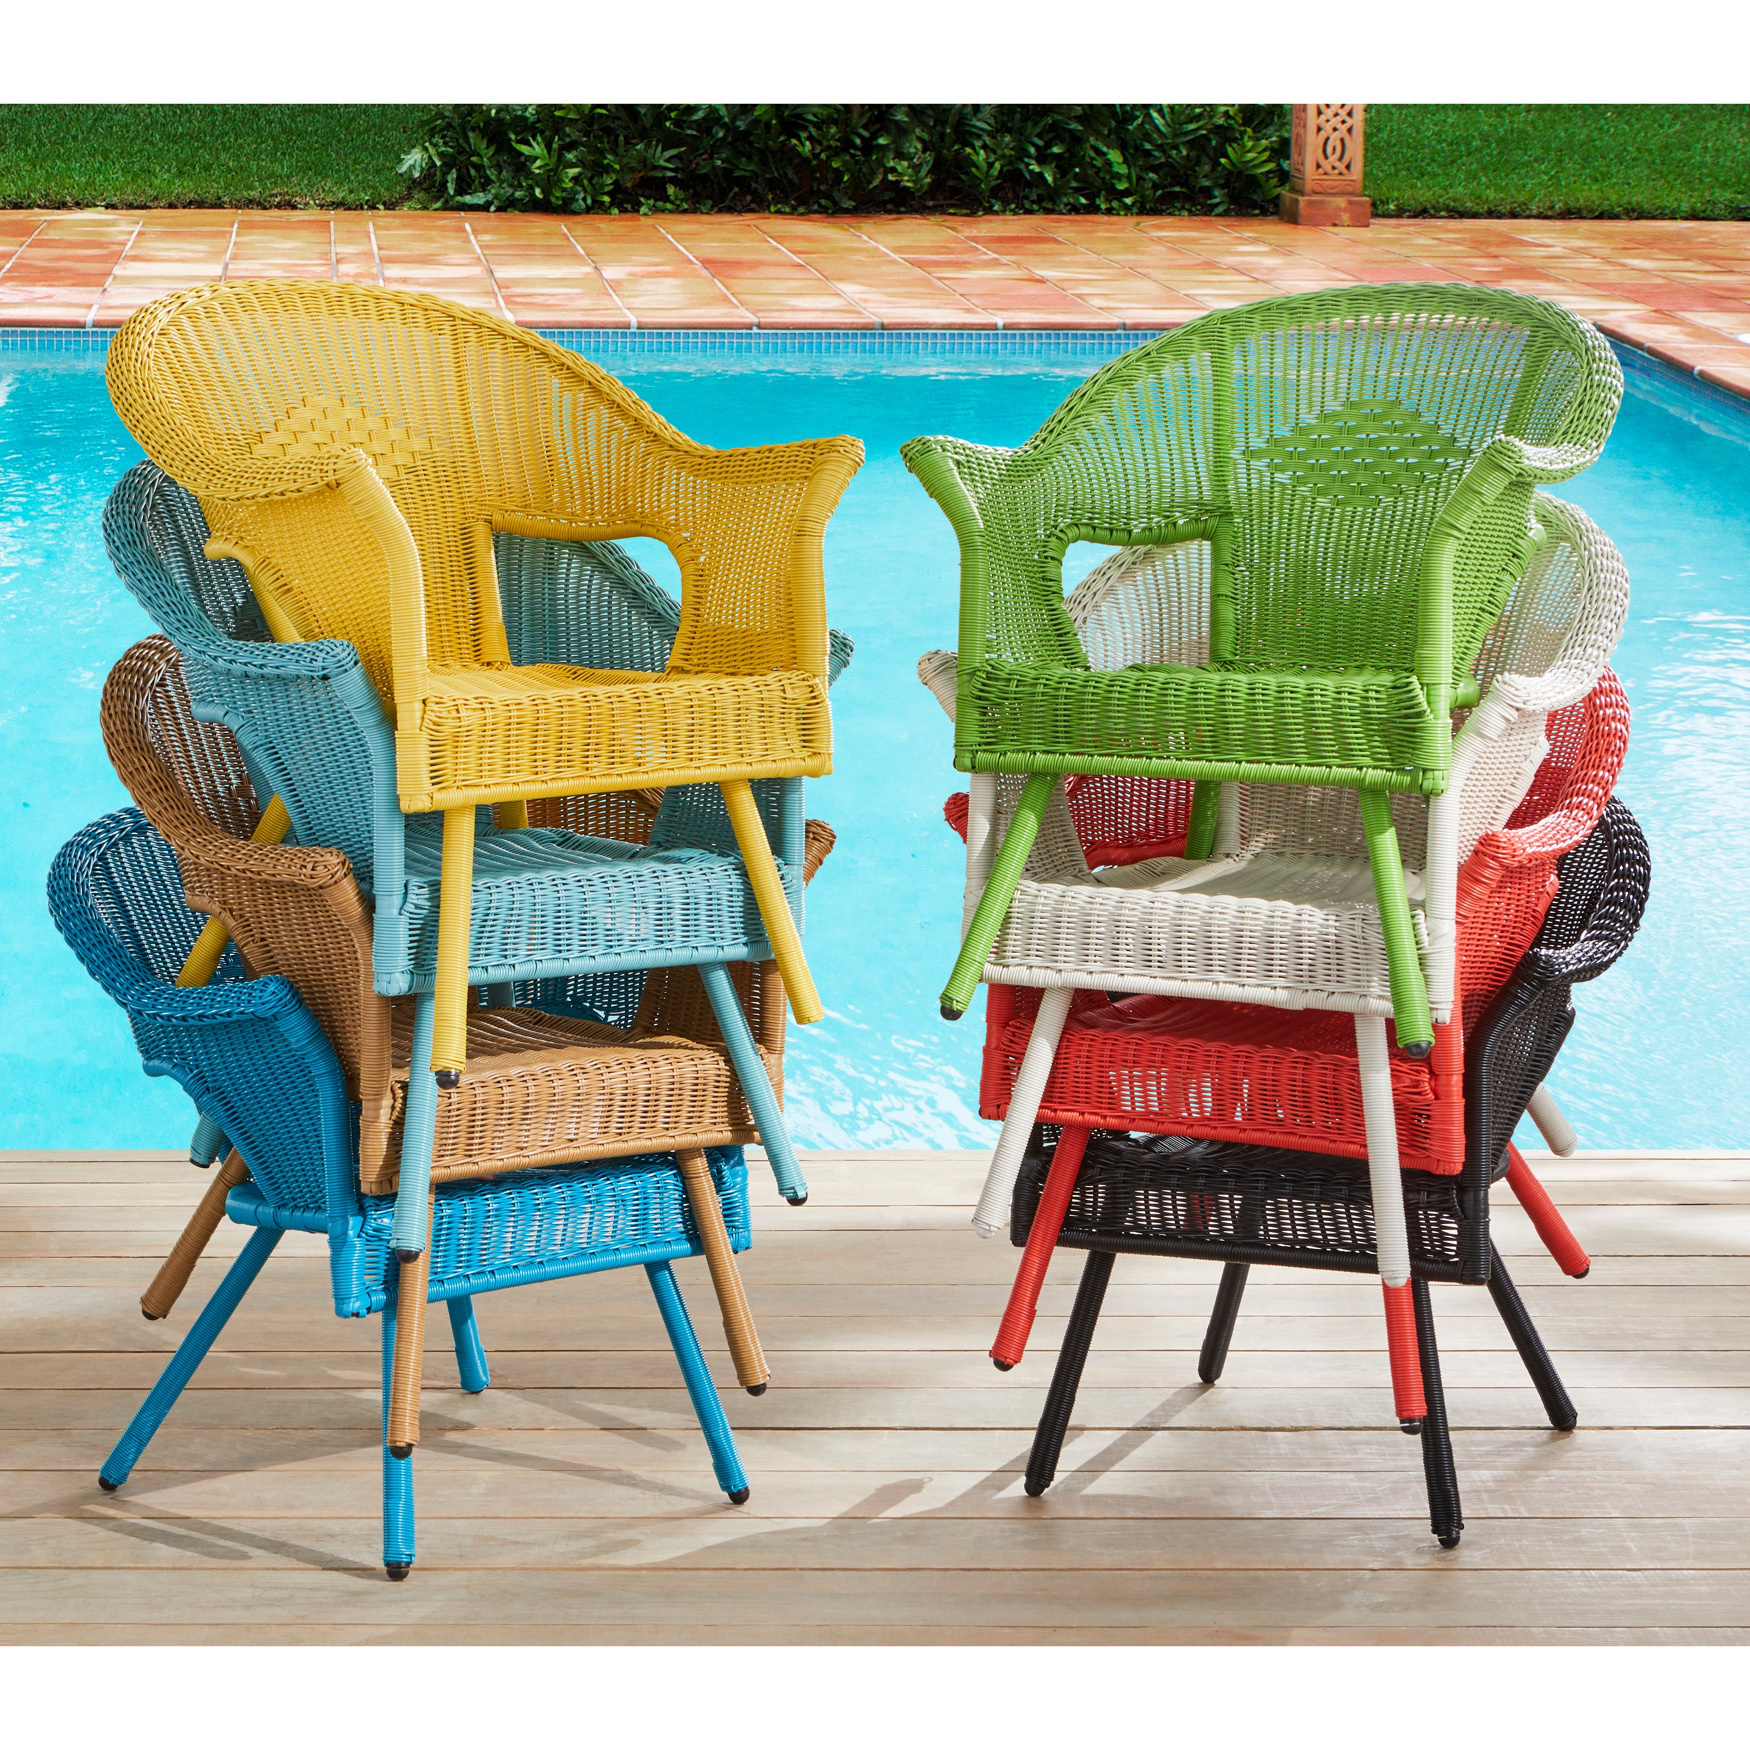 Roma All-Weather Wicker Stacking Chair, BLACK